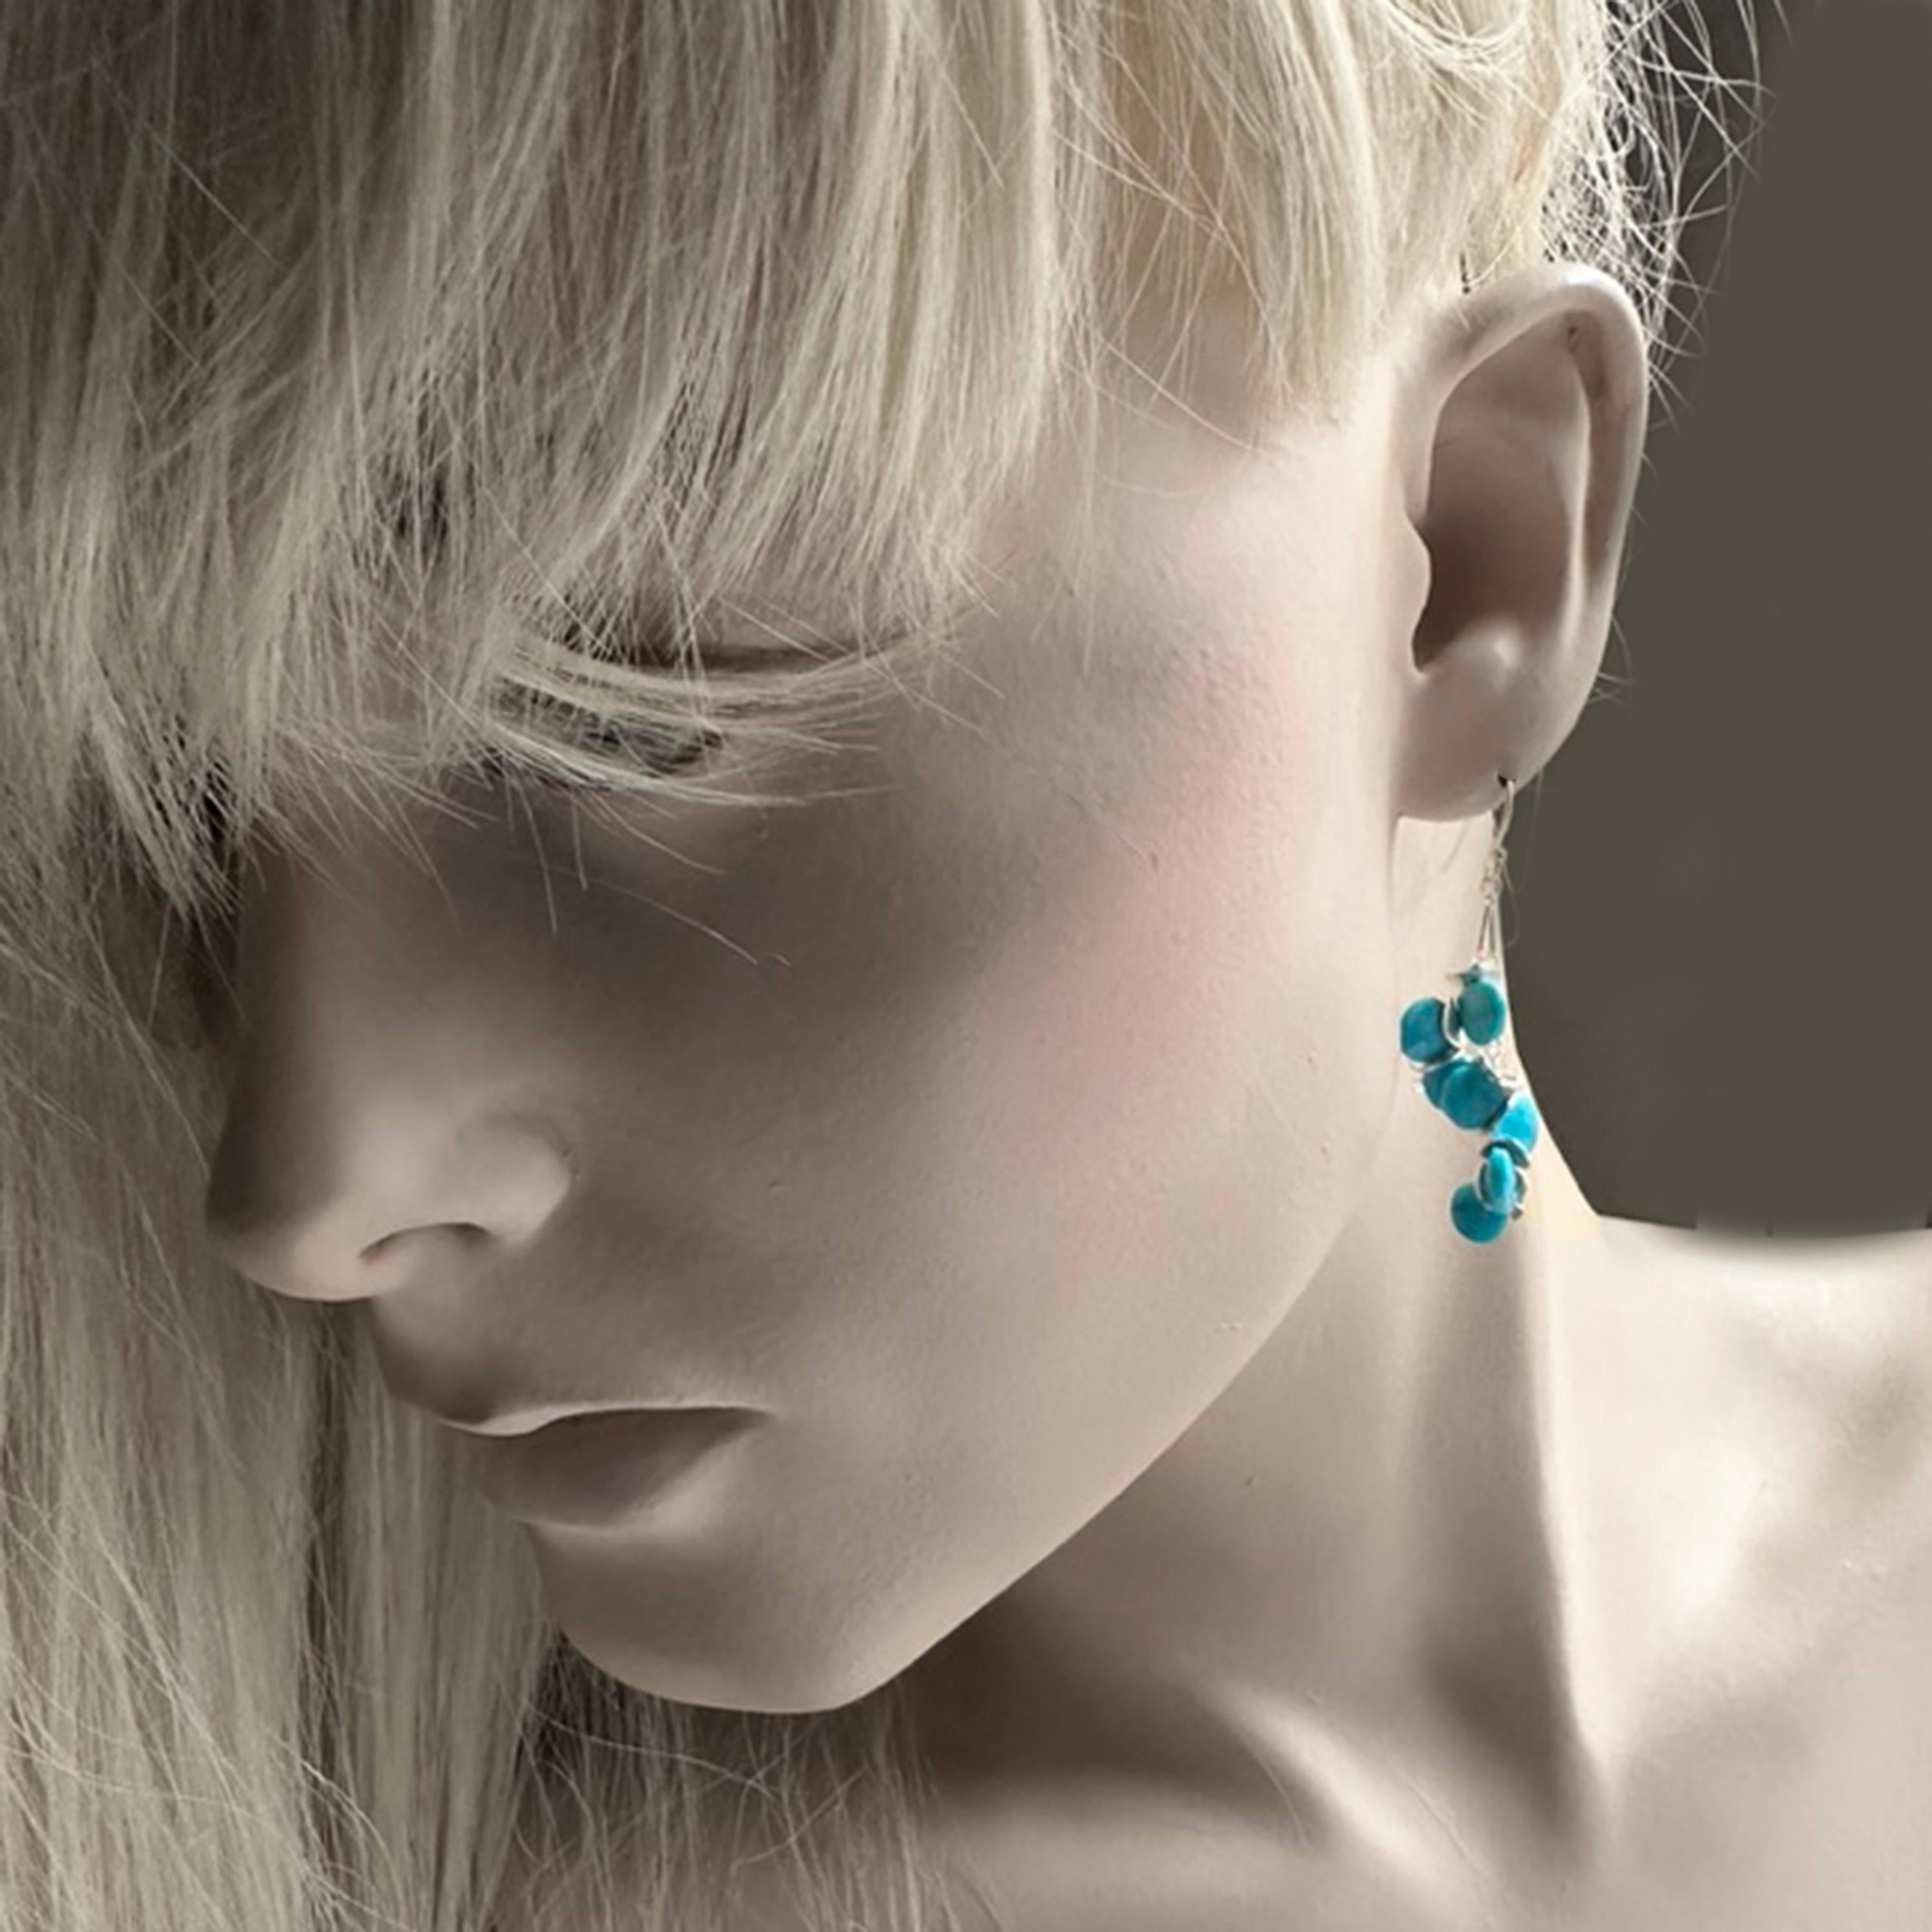 Bring the timeless beauty of the Sleeping Beauty Turquoise to life with a unique pair of earrings featuring rare briolettes from the now-closed Arizona mine. Handcrafted on sterling silver ear wires, this limited-edition piece will add charming